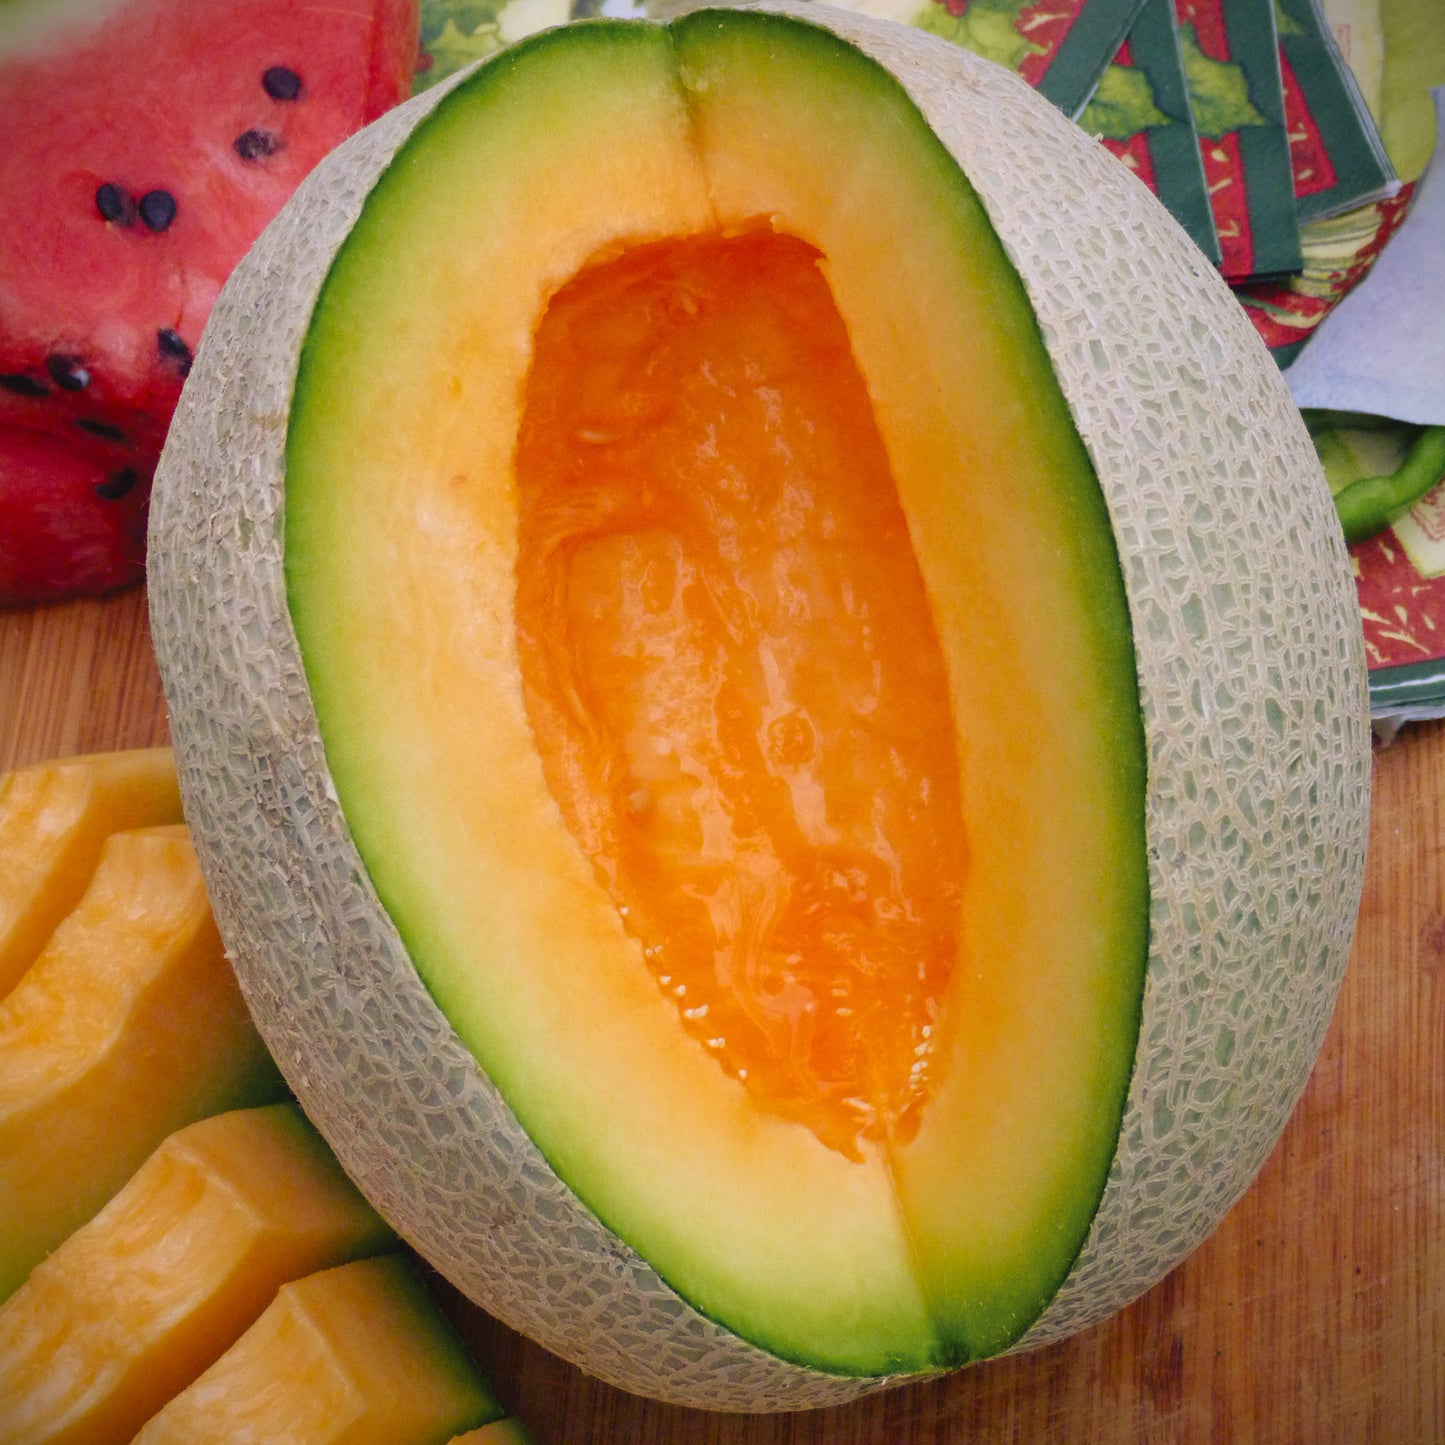 Sierra Gold Heirloom Cantaloupe seeds fully matured and recently pulled. A quarter of this melon is missing to display the inside of its juicy flesh.